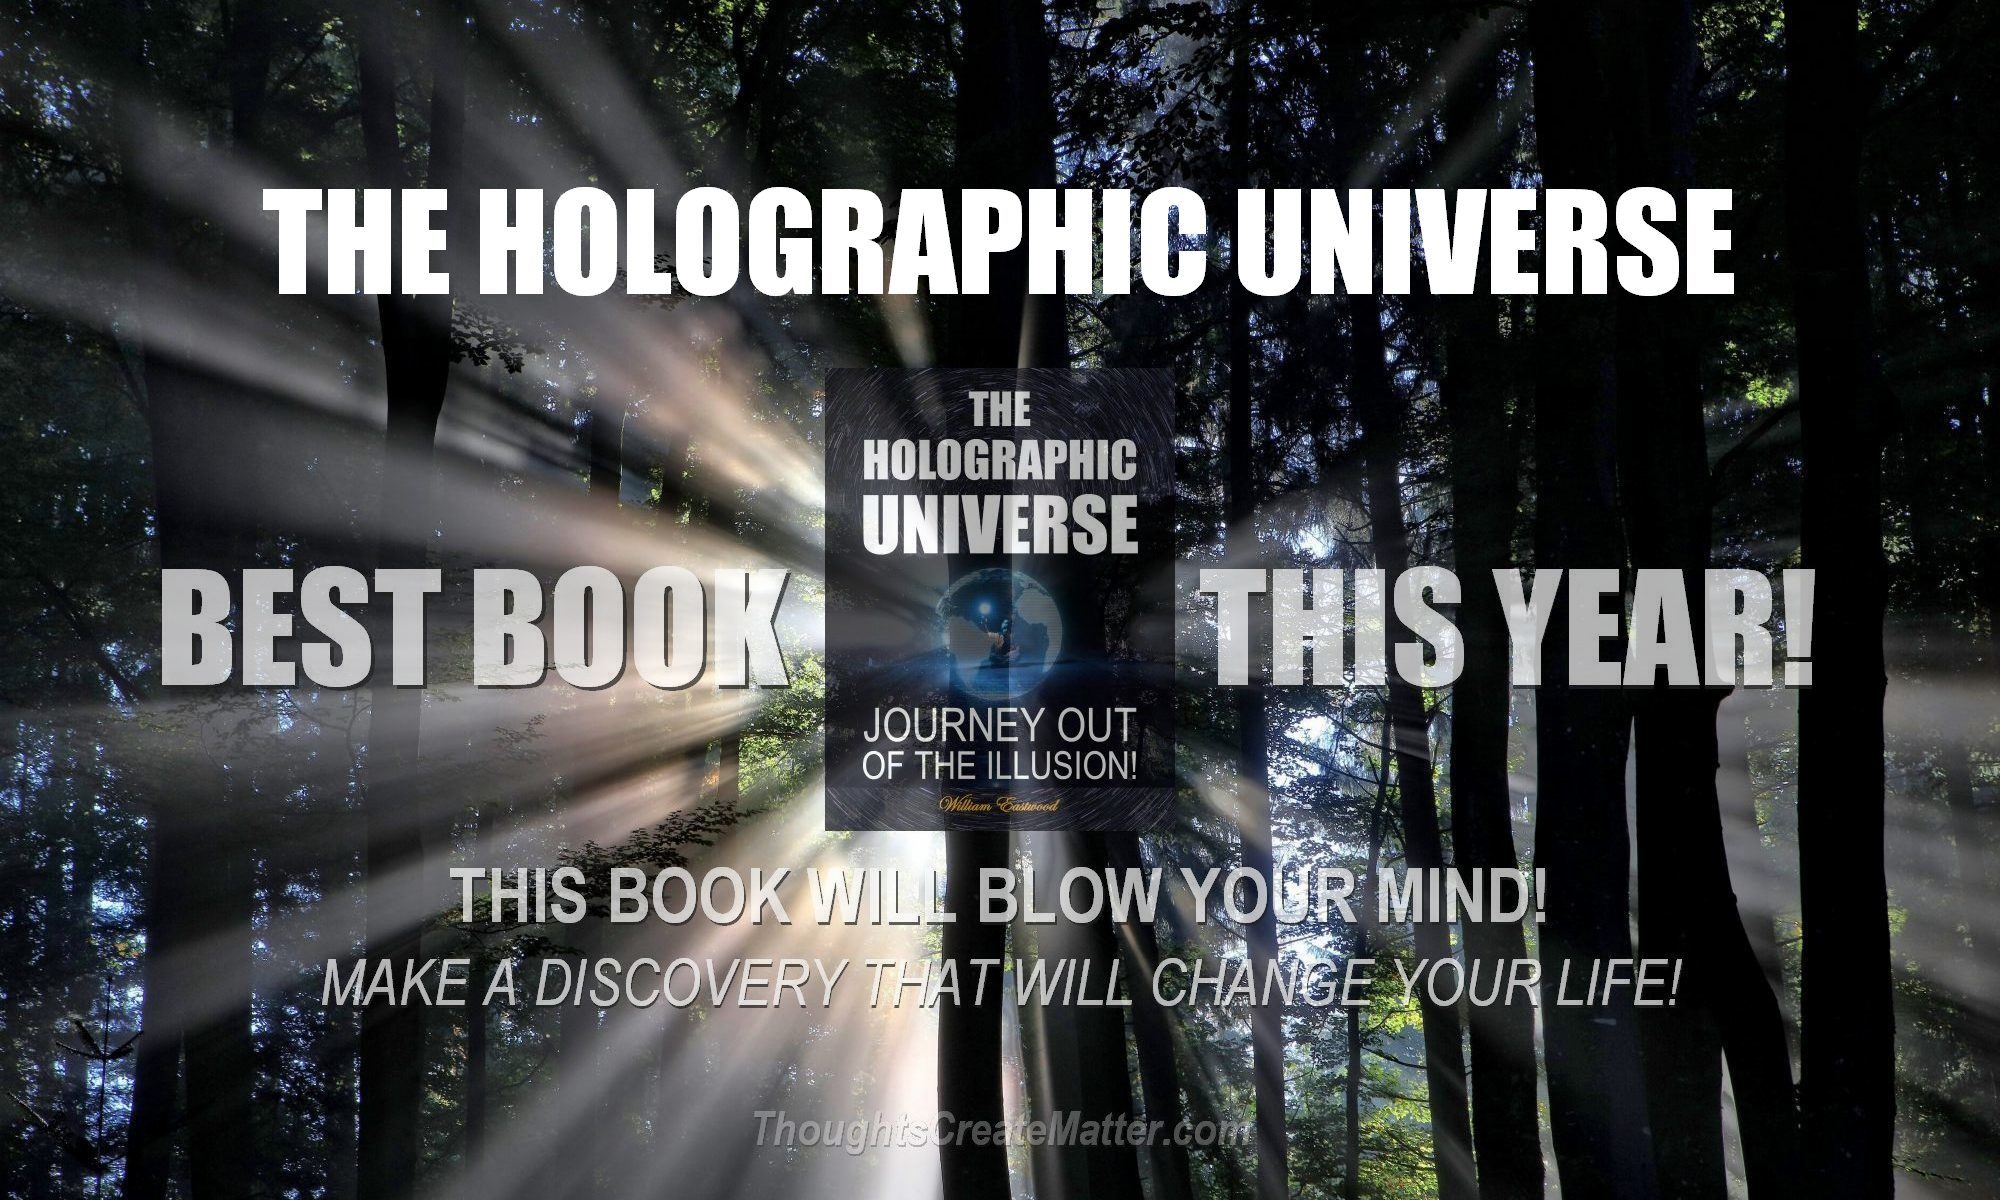 The holographic universe - journey out of the illusion